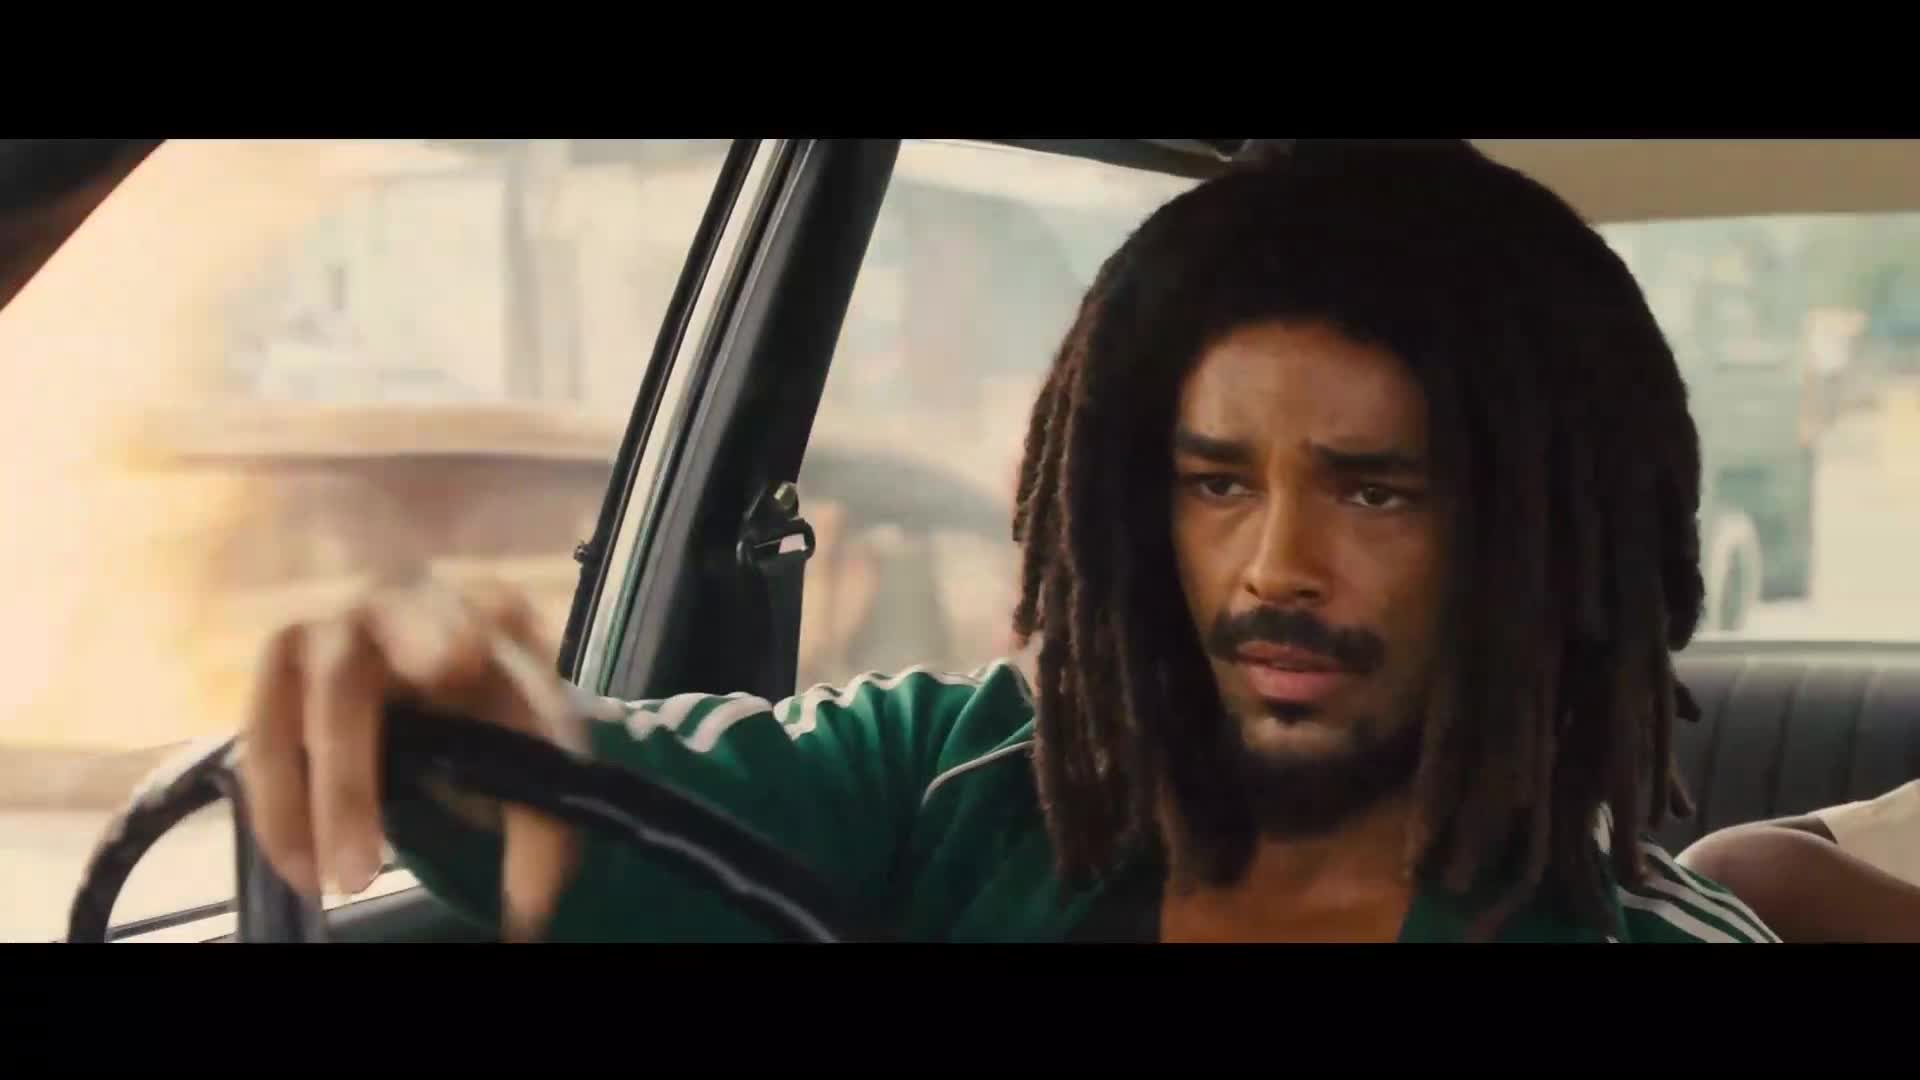 Bob Marley 'One Love' Hits $80M in Opening Weekend